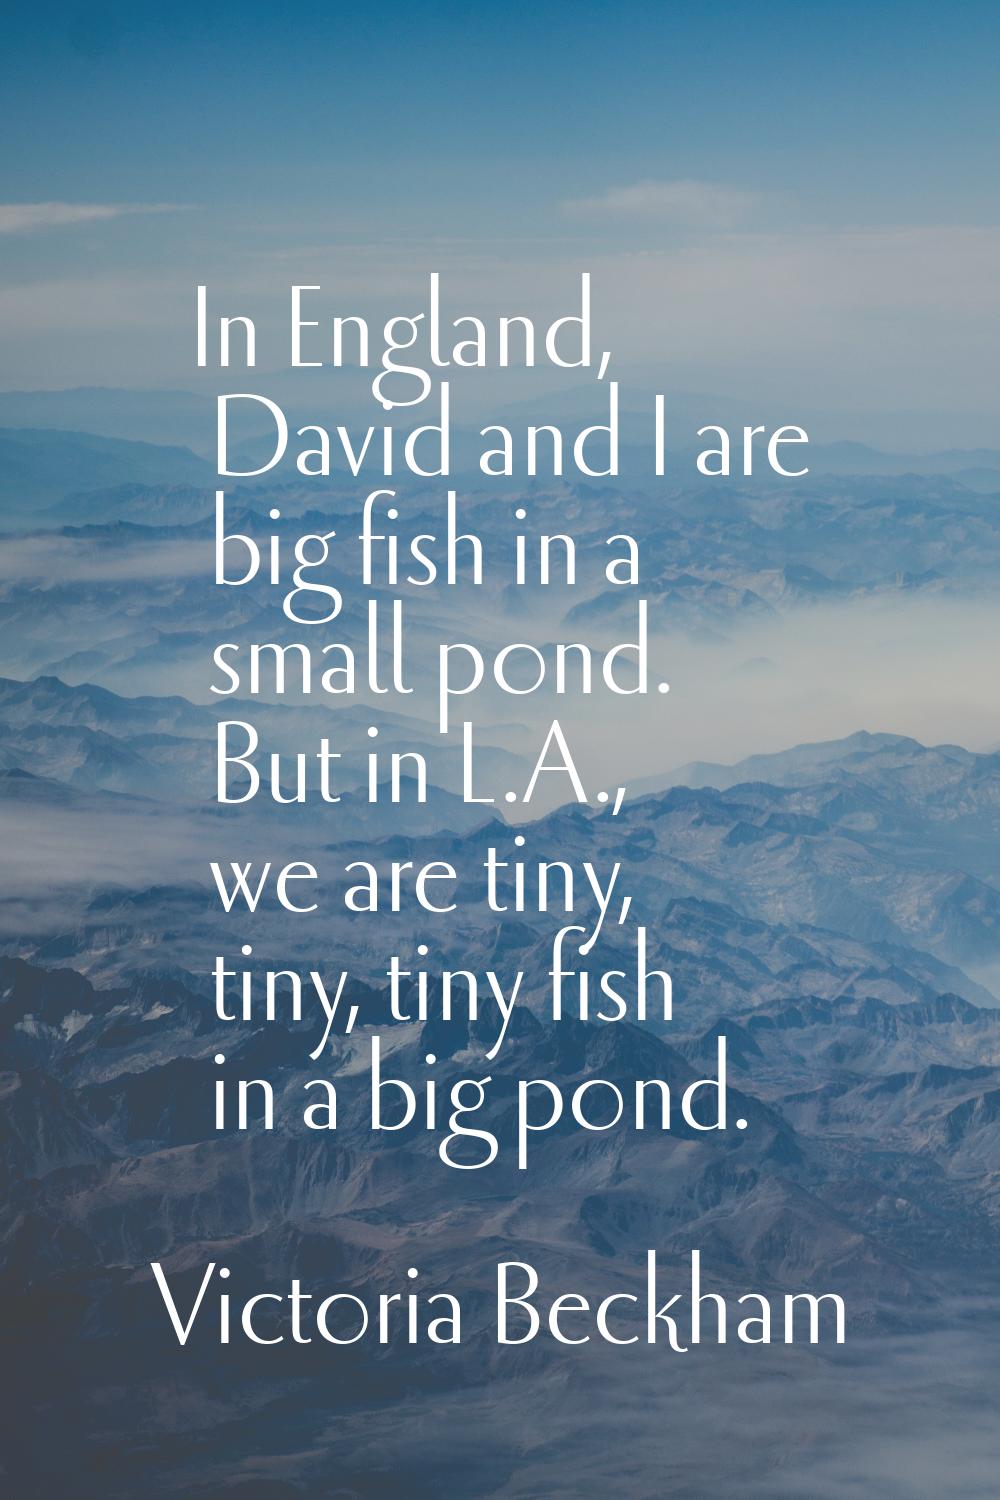 In England, David and I are big fish in a small pond. But in L.A., we are tiny, tiny, tiny fish in 